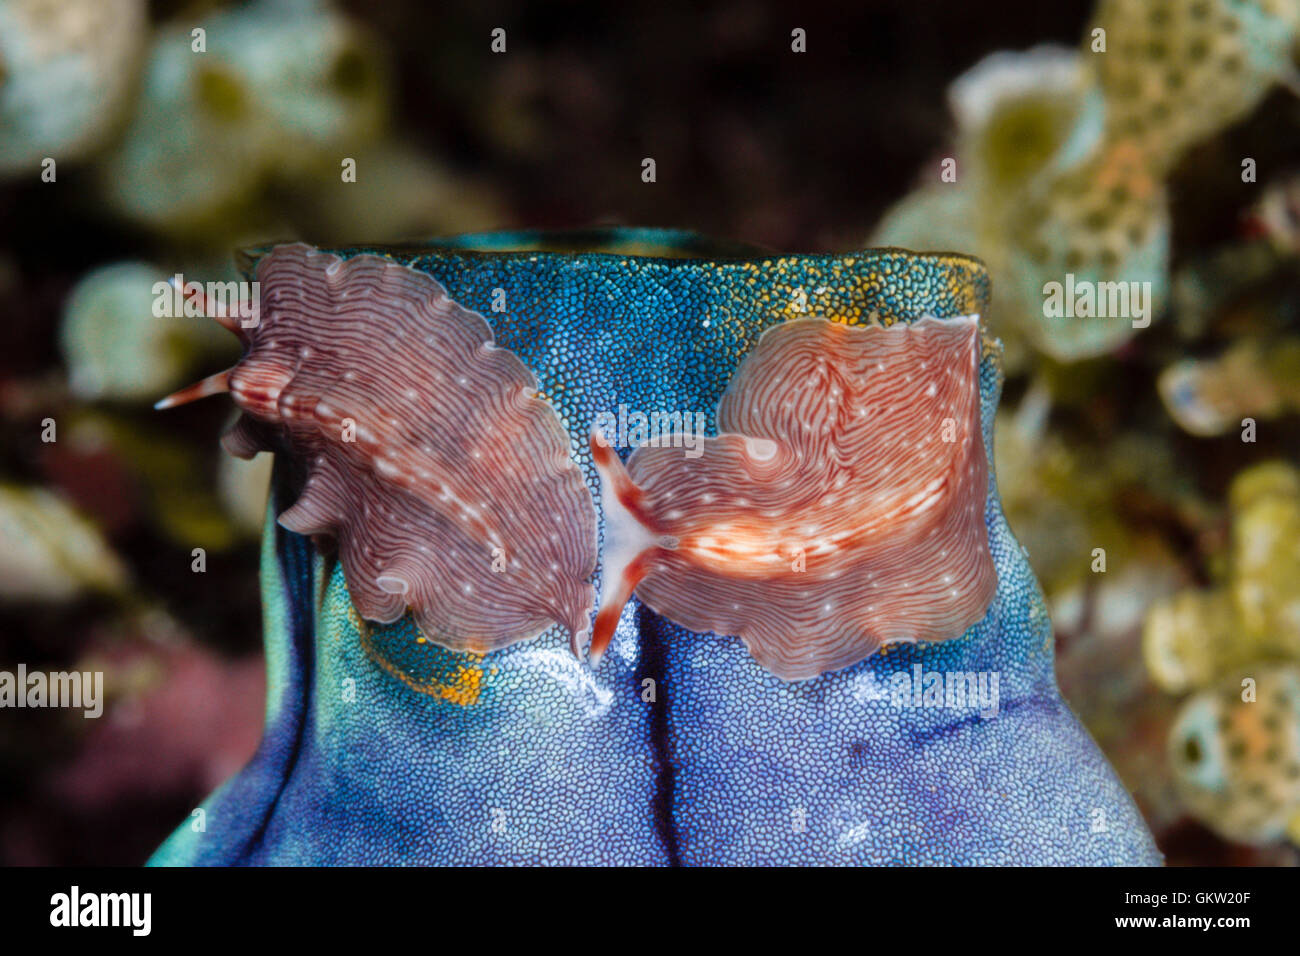 Flatworm on Tunicate, Pceudoceros sp., Ambon, Moluccas, Indonesia Stock Photo